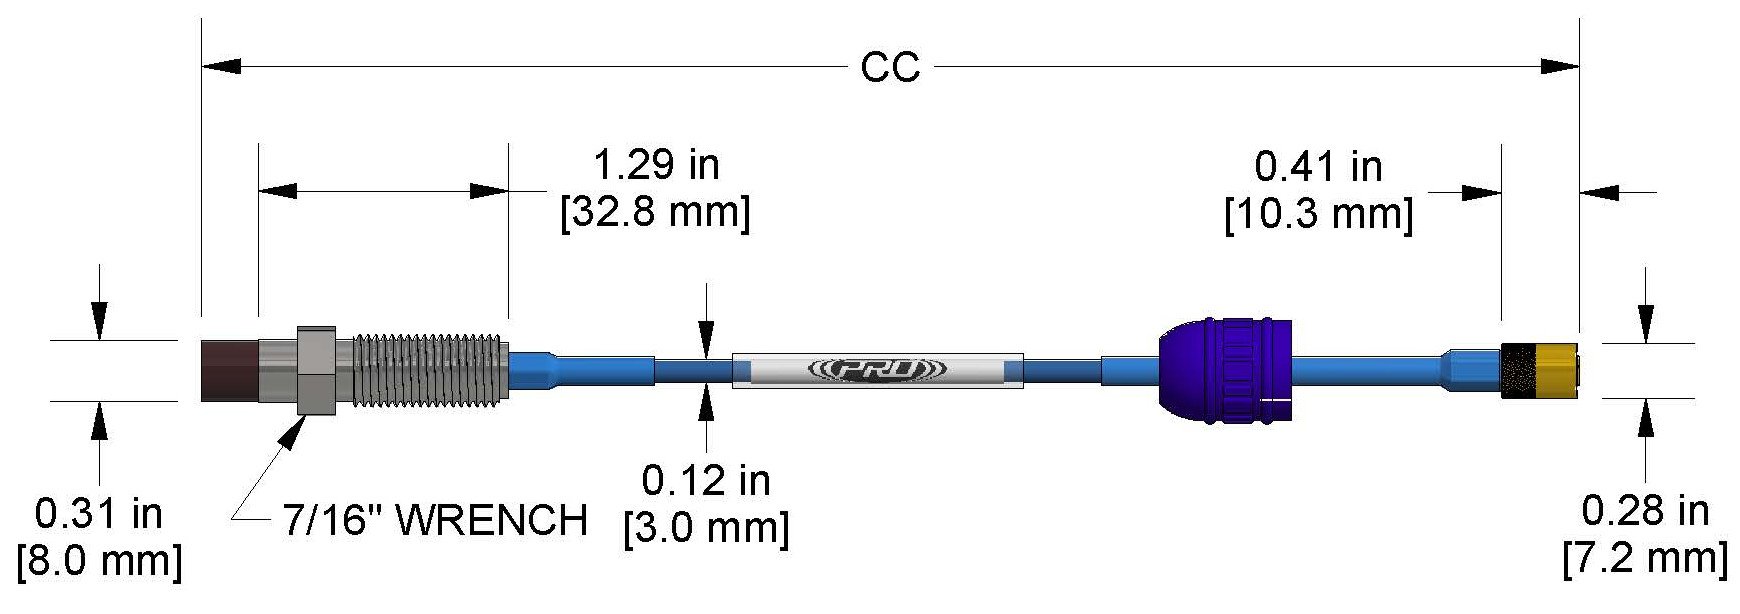 A dimension drawing of a Reverse Mount CTC PRO Line Hazardous-Area Approved DP1001 proximity probe.